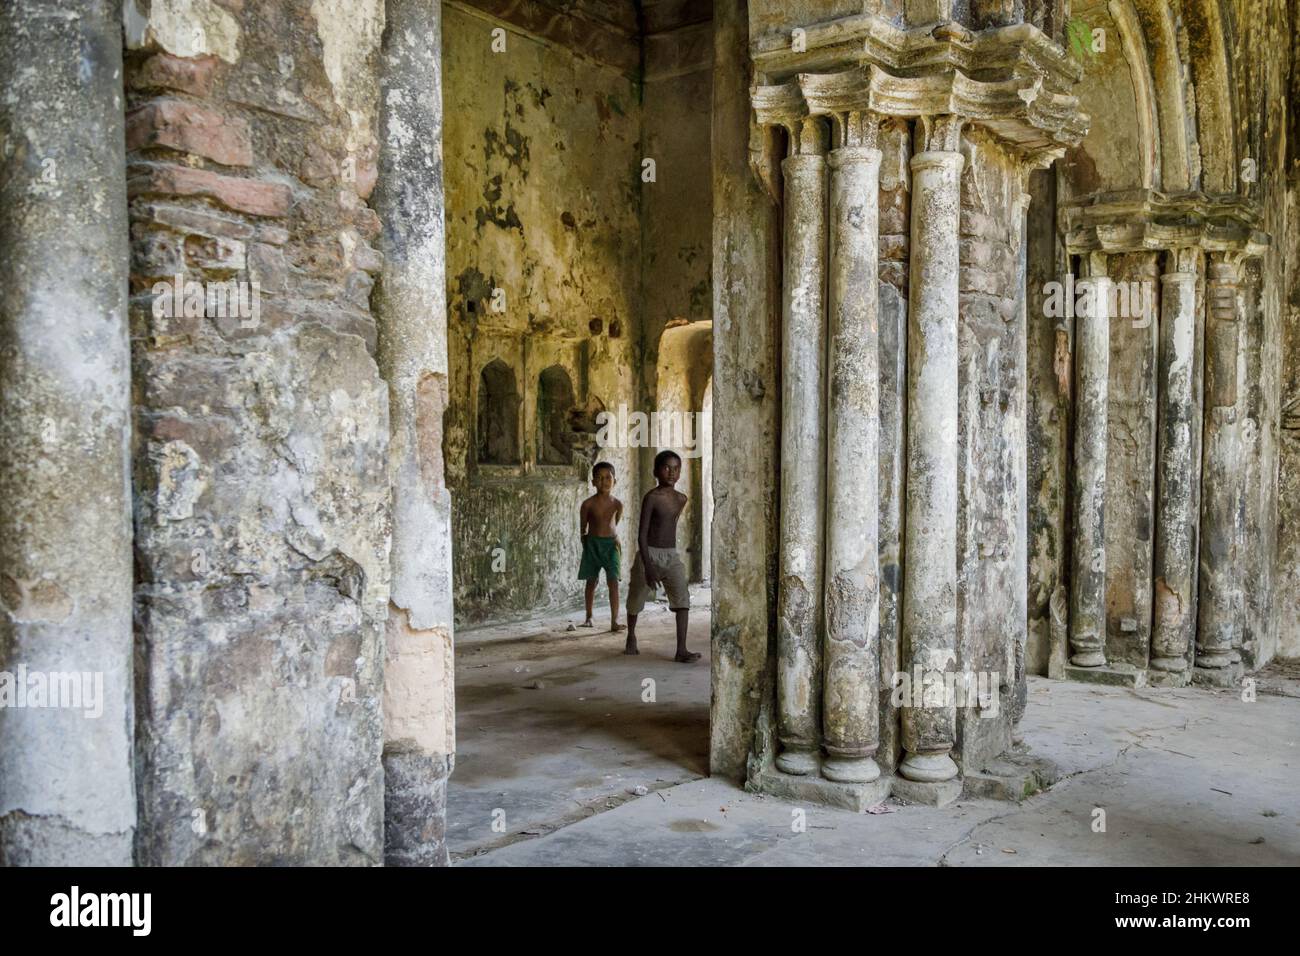 Two young boys playing in the ruins of the Teota Zamindar Palace in the Manikganj district. The palace, believed to be around 300 years old, had more than 50 rooms originally. Stock Photo